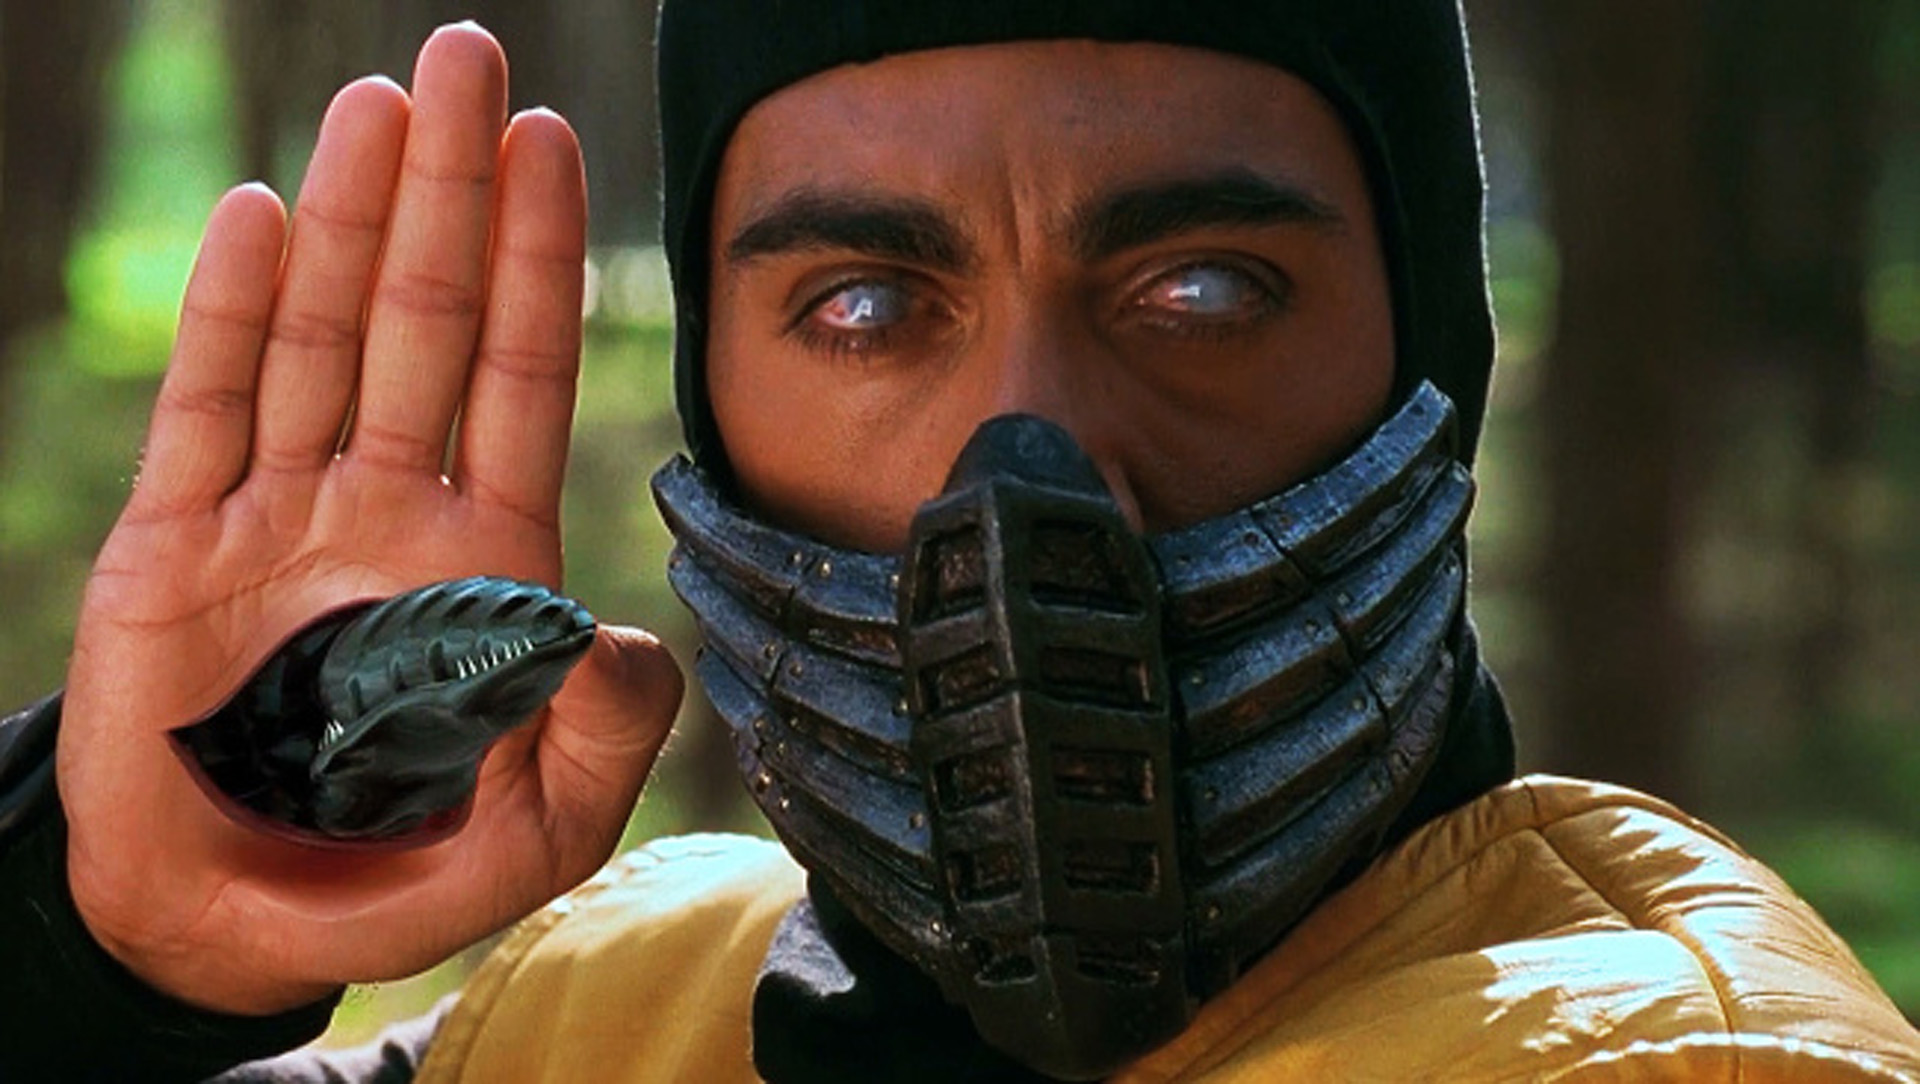 The new Mortal Kombat movie will have Rrated Fatalities